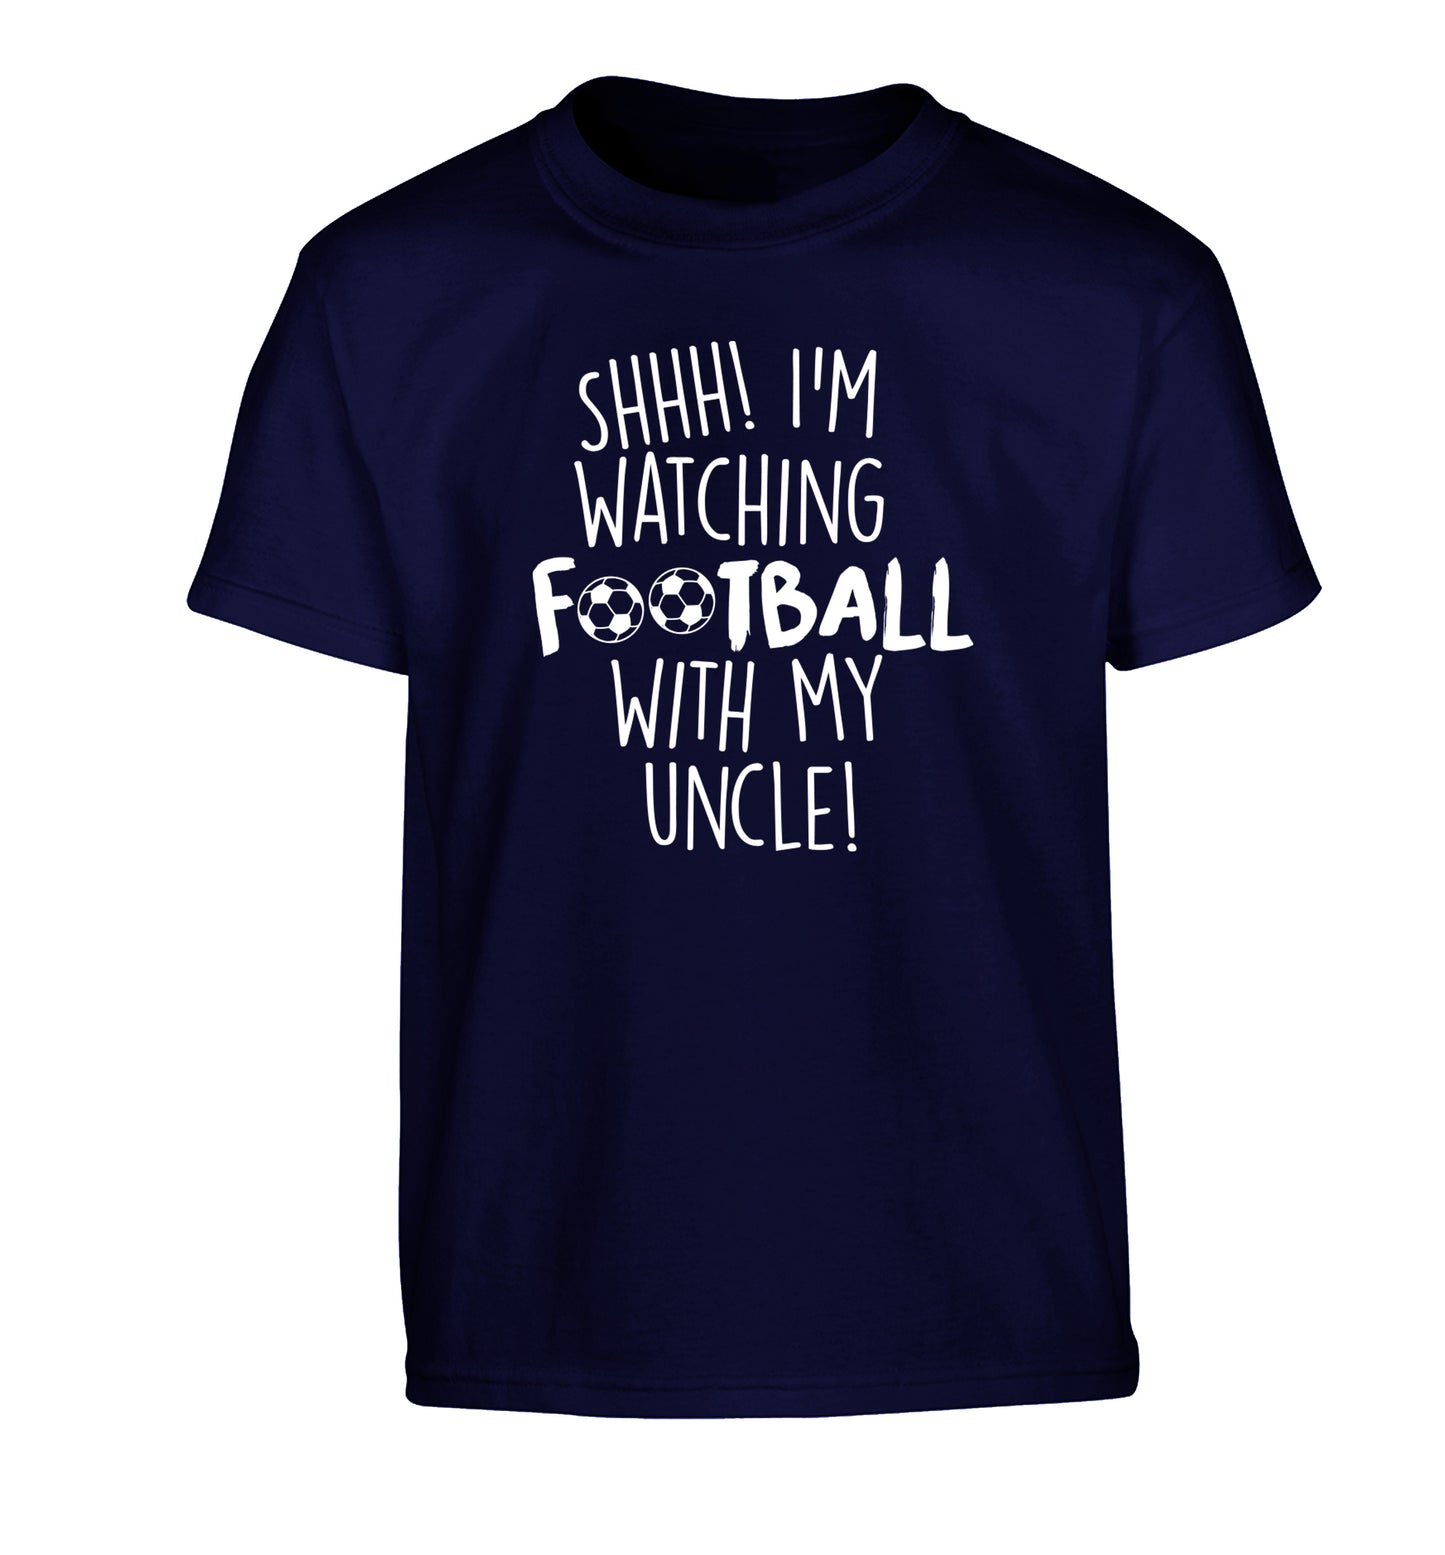 Shhh I'm watching football with my uncle Children's navy Tshirt 12-14 Years